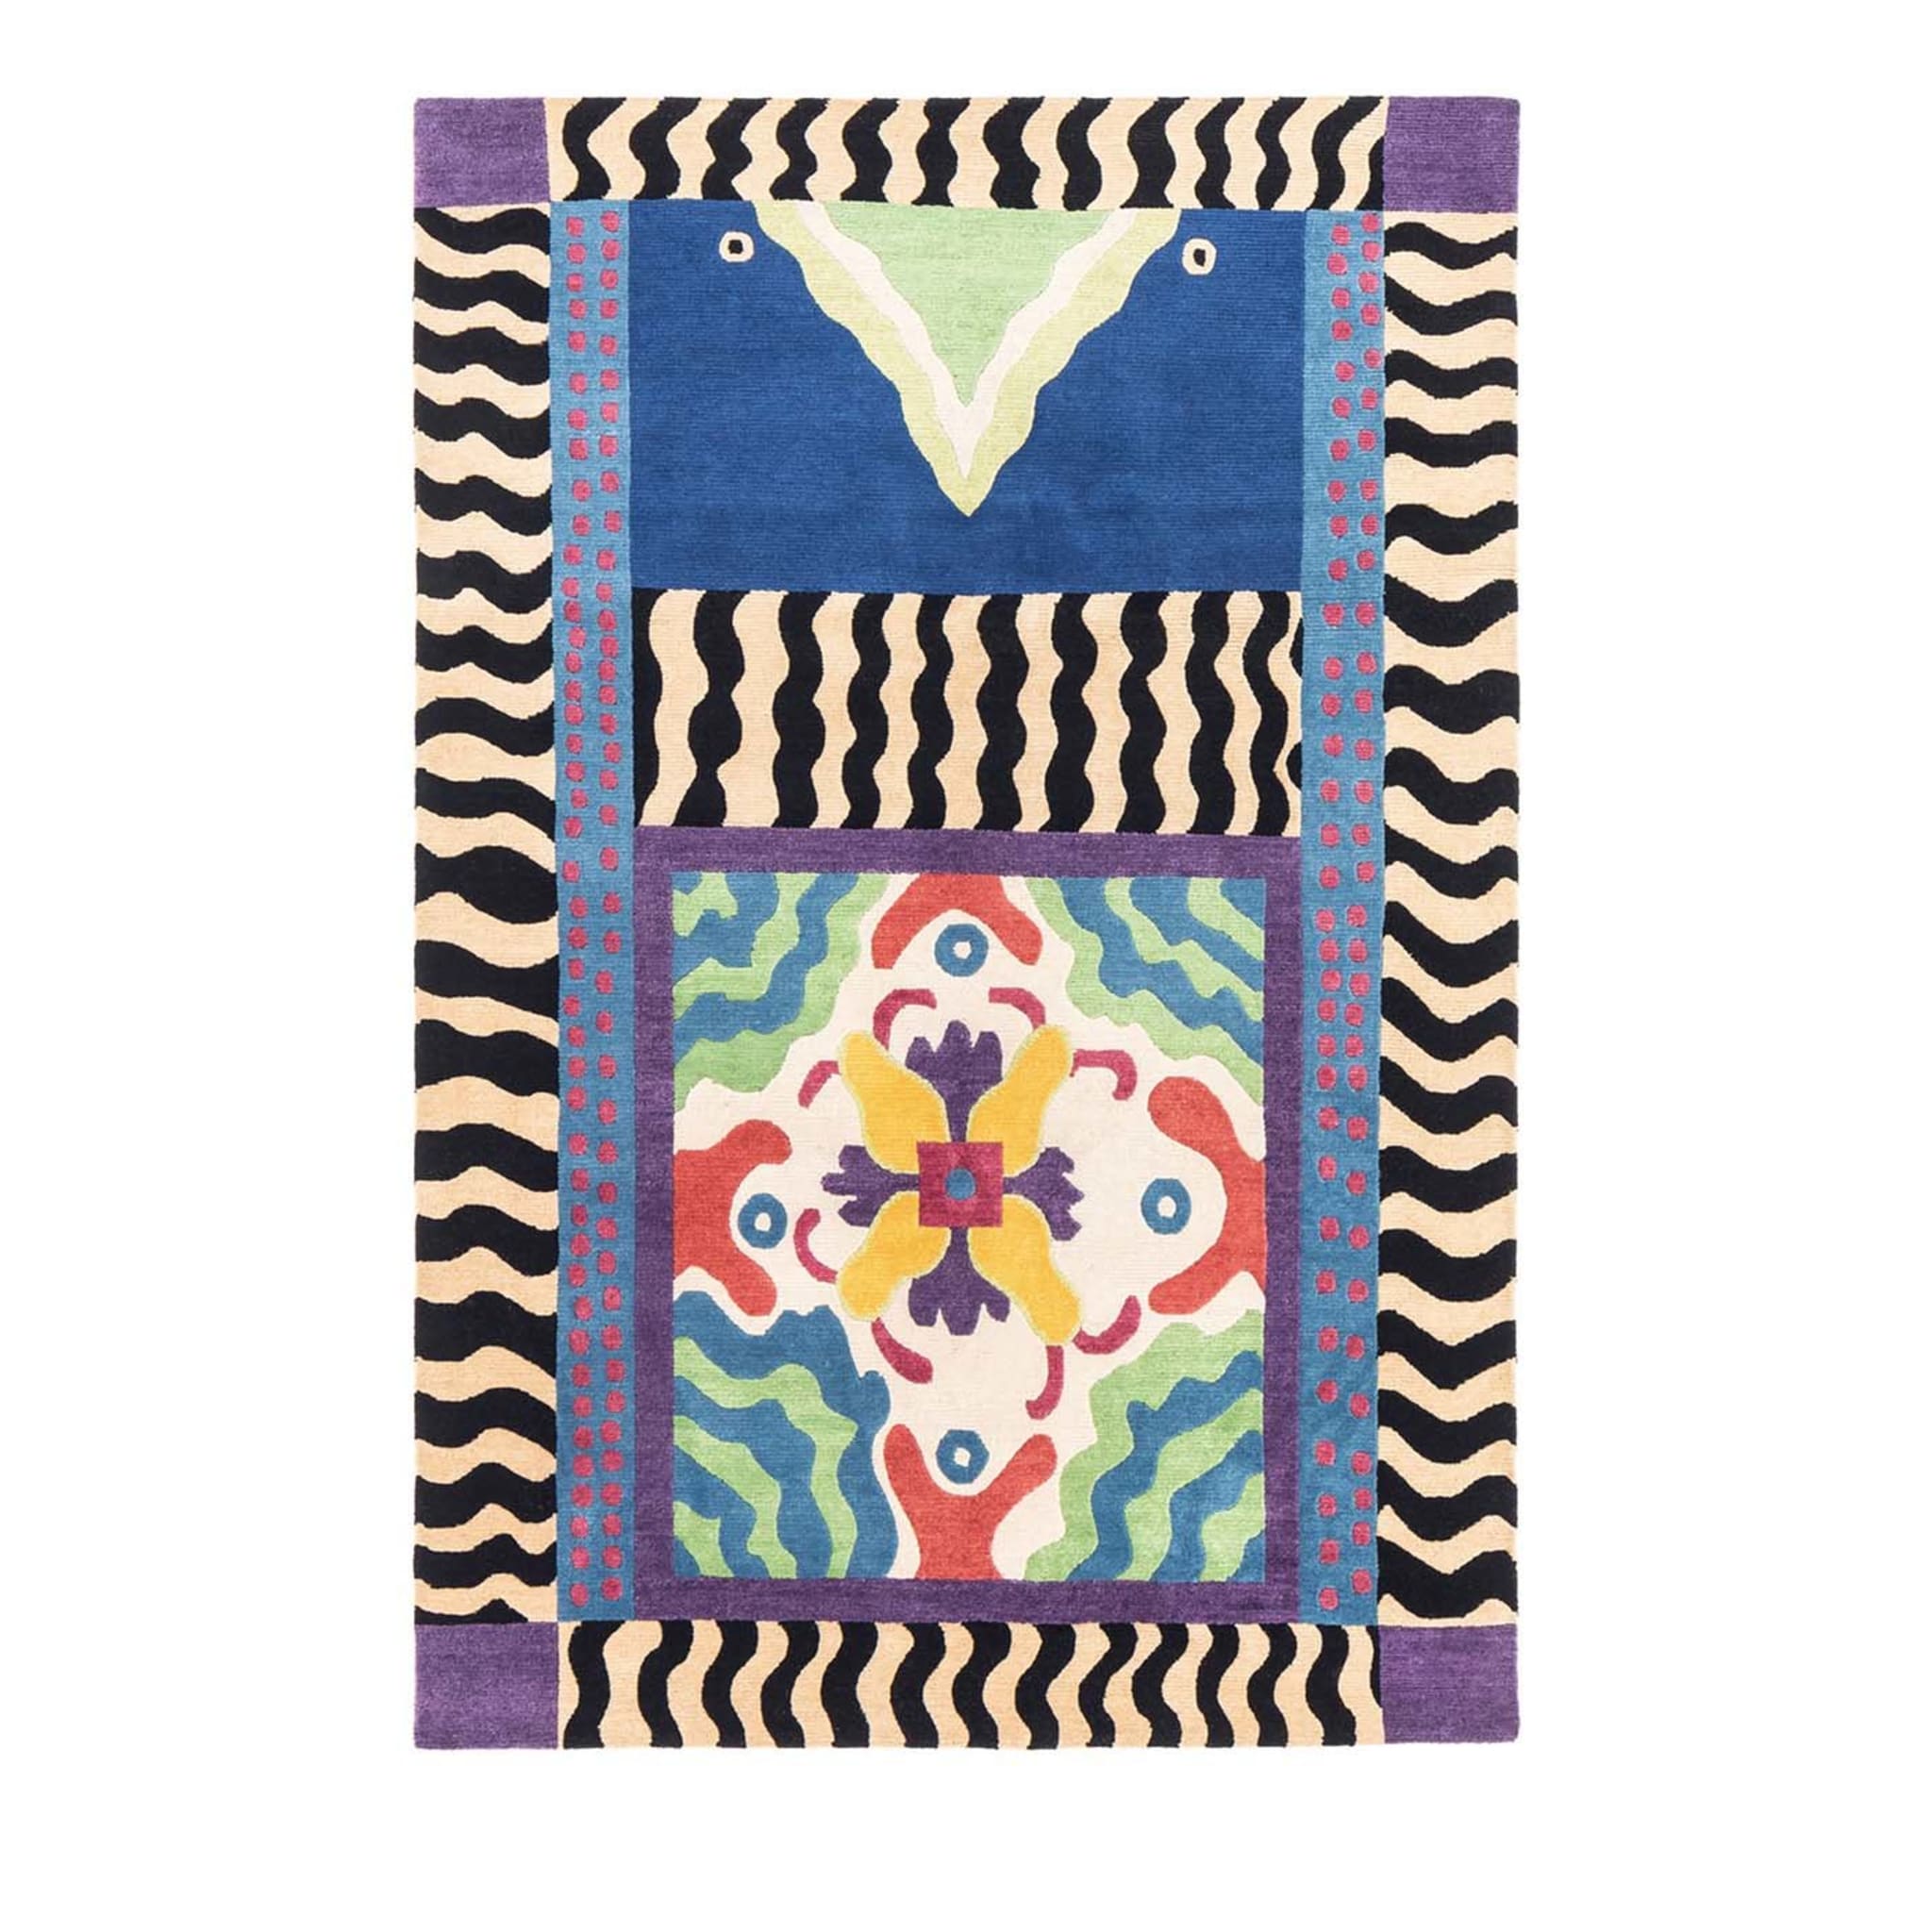 Sottovento Tapestry by Nathalie Du Pasquier - Post Design - Main view